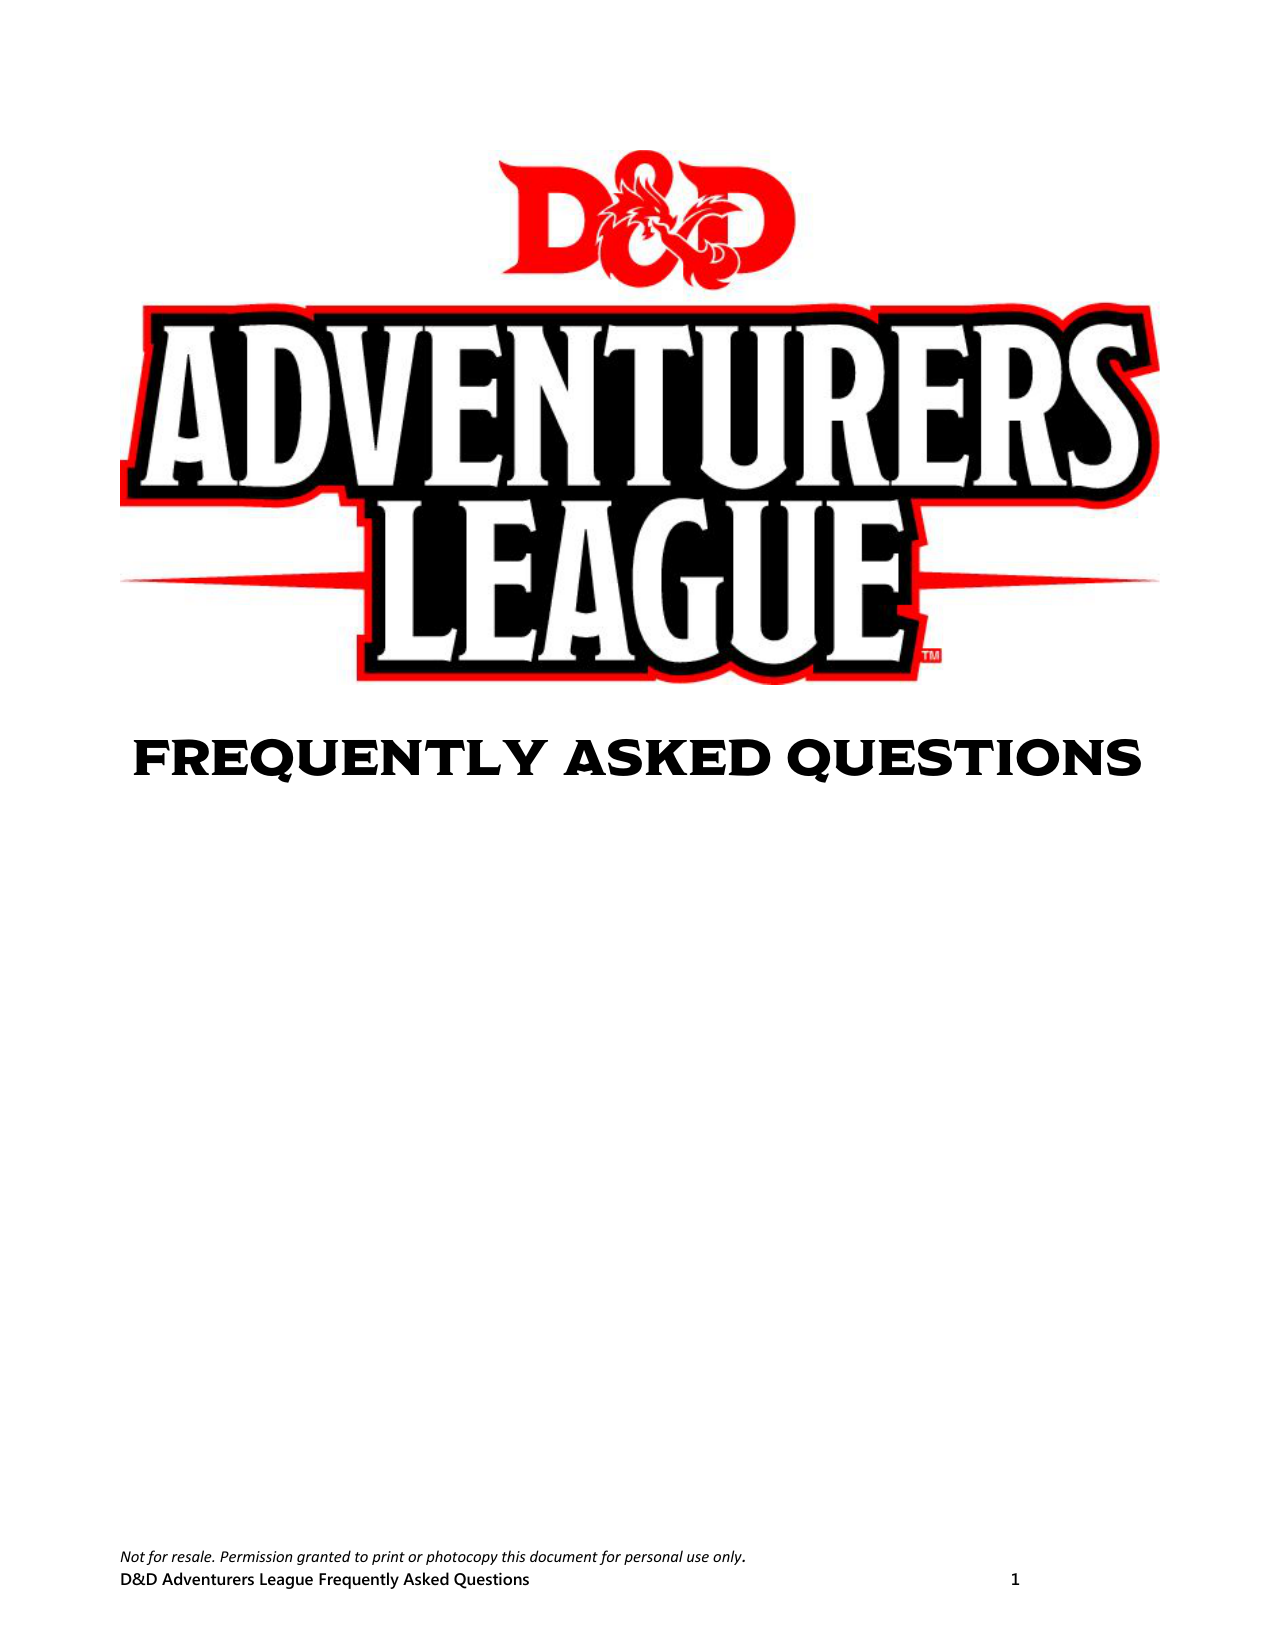 downtime options in the dmg in adventure league